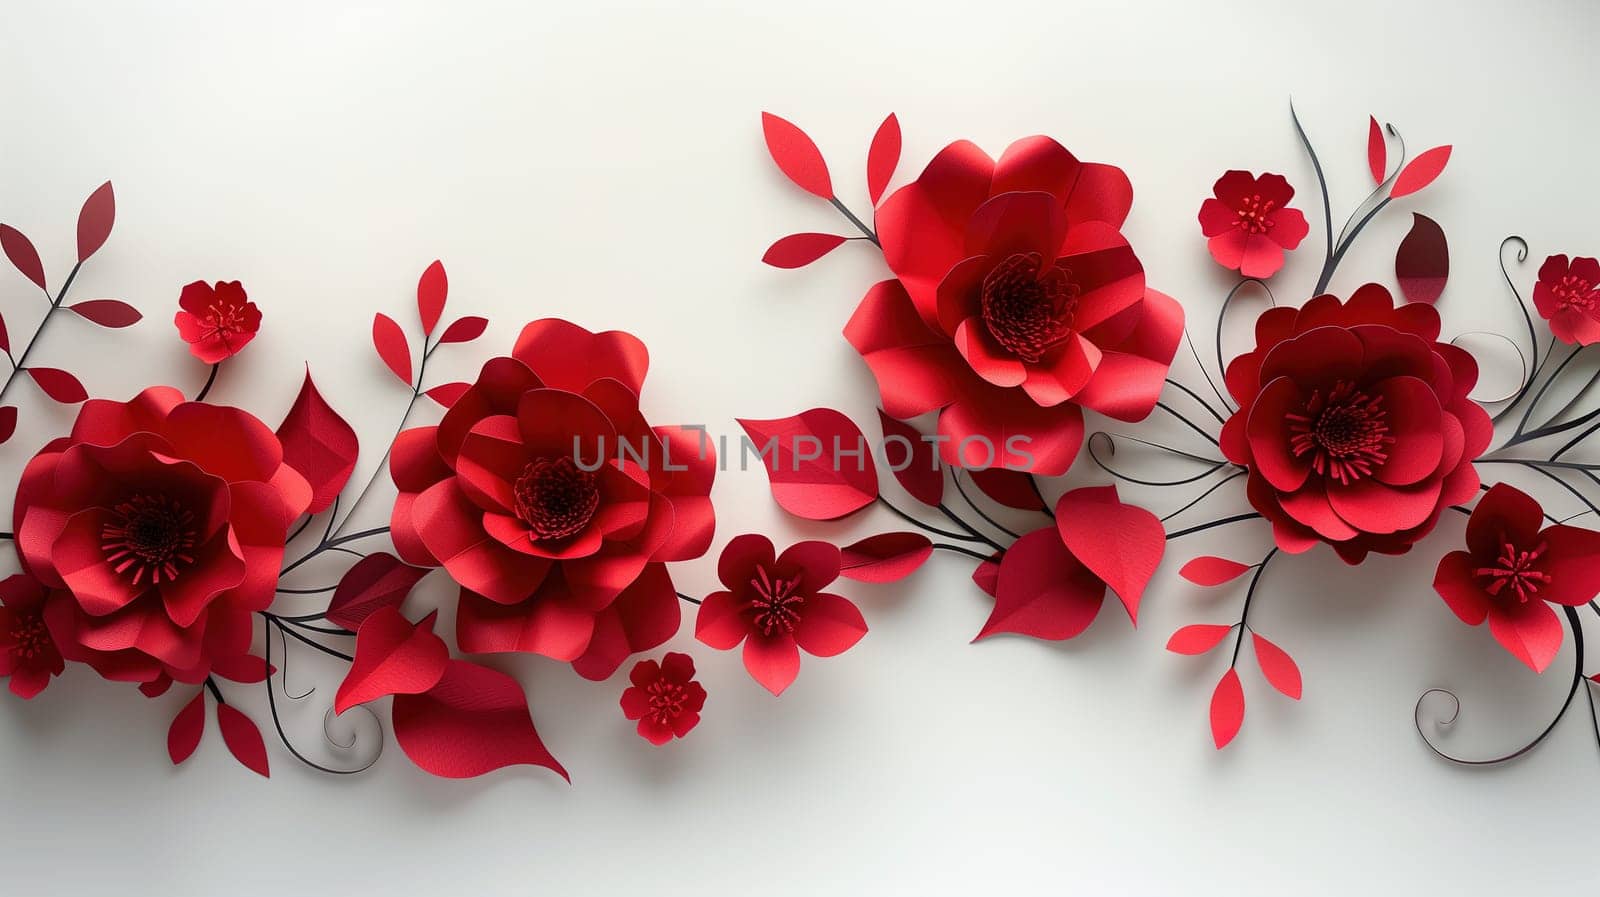 Group of Red Paper Flowers on White Wall by TRMK